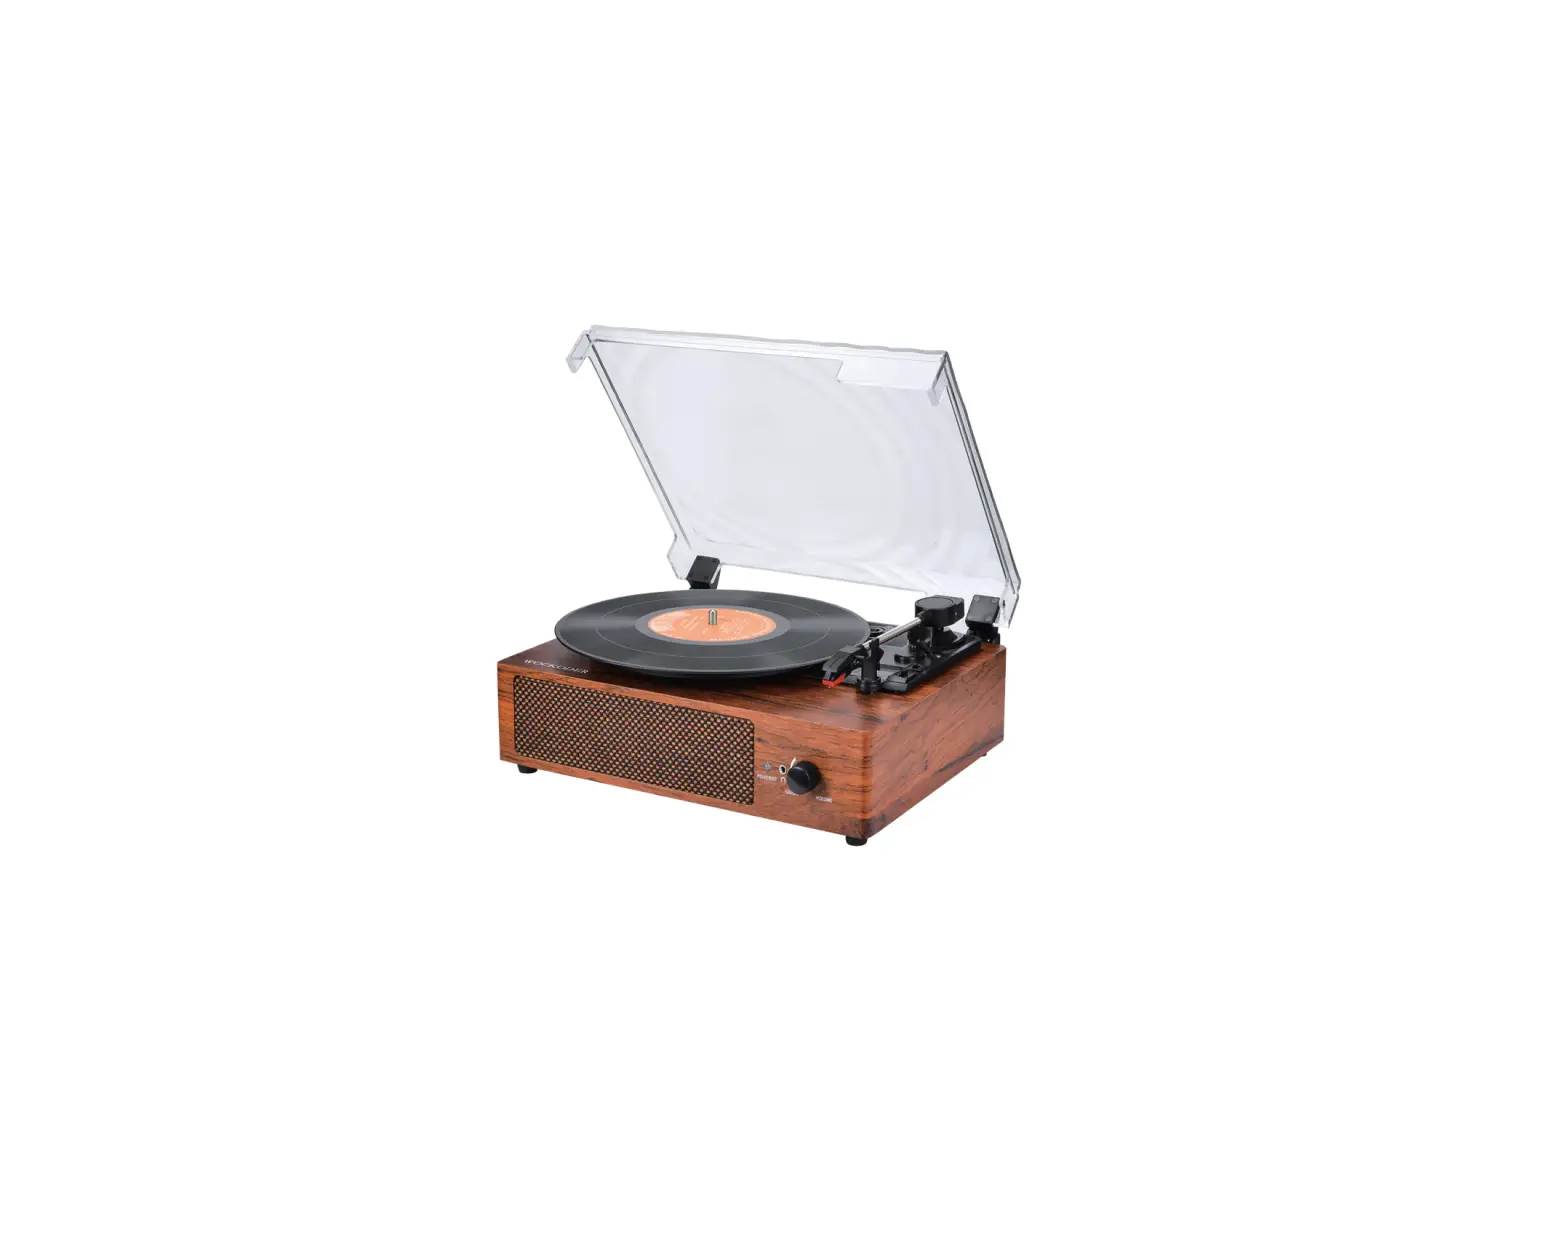 WOCKODER KD-2008BL Record Player Turntable Wireless Portable LP Phonograph Instruction Manual